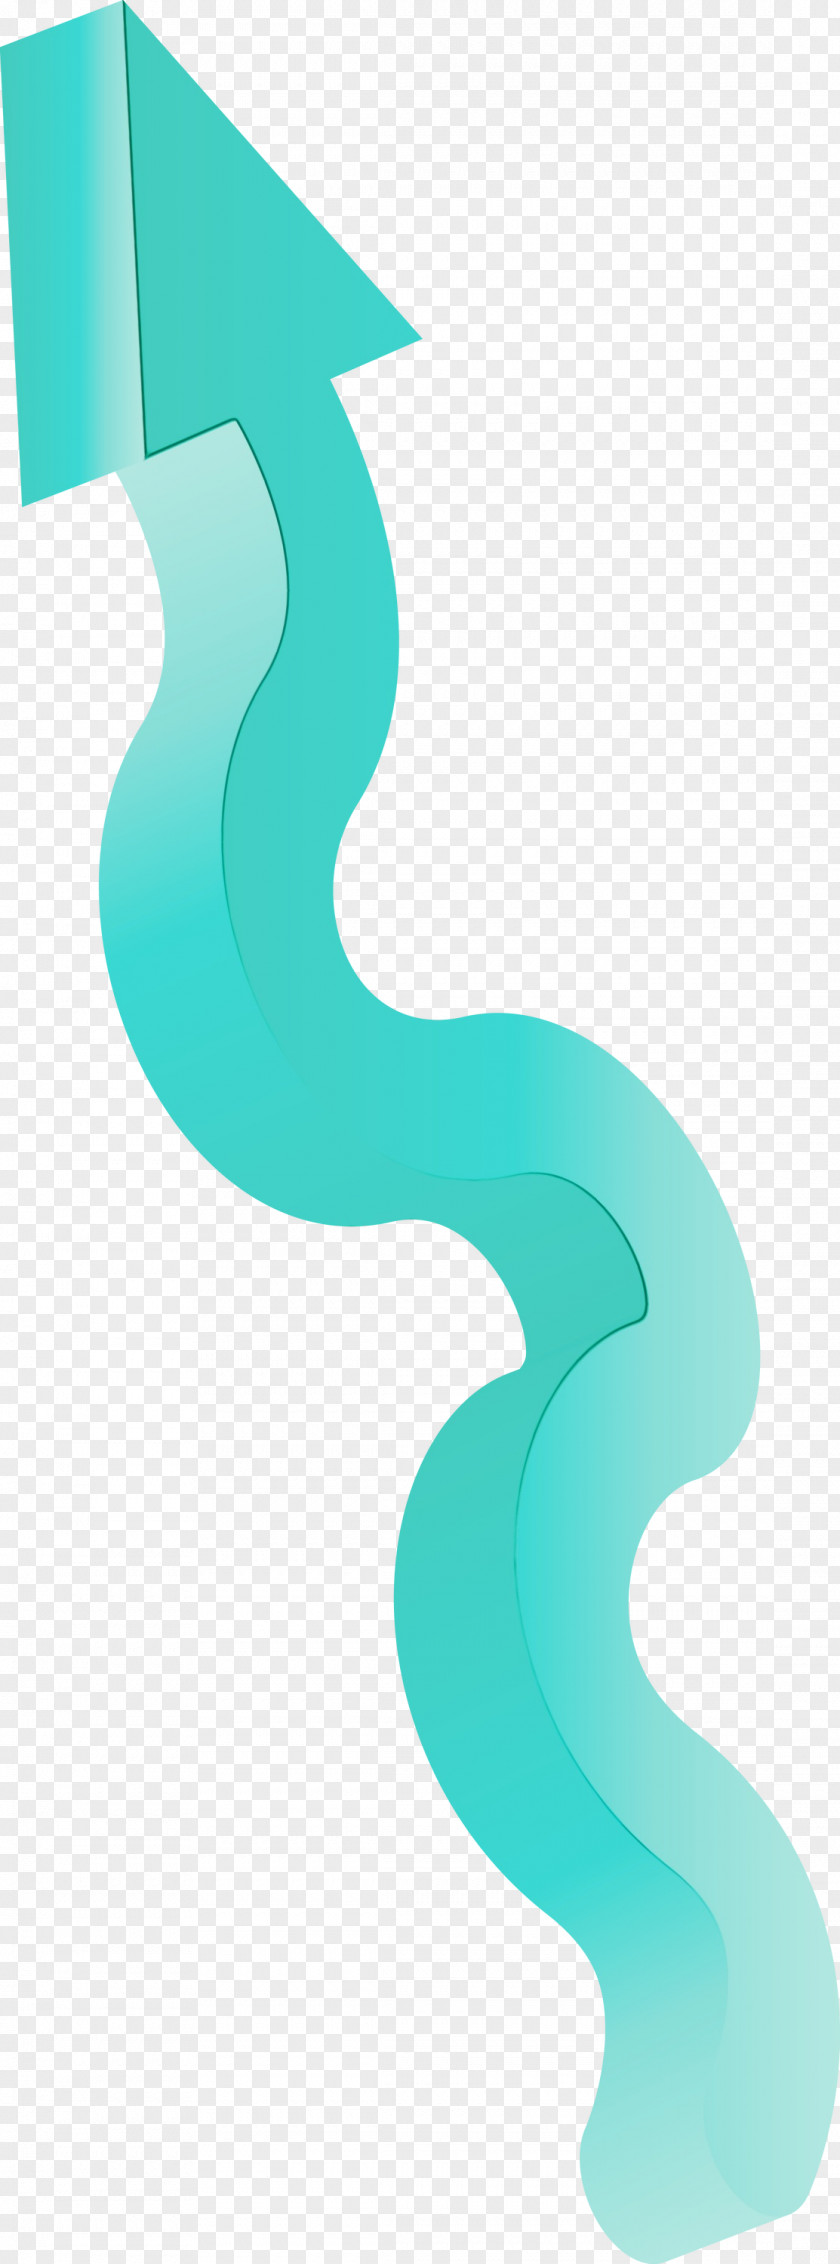 Aqua Turquoise Green Teal Material Property PNG